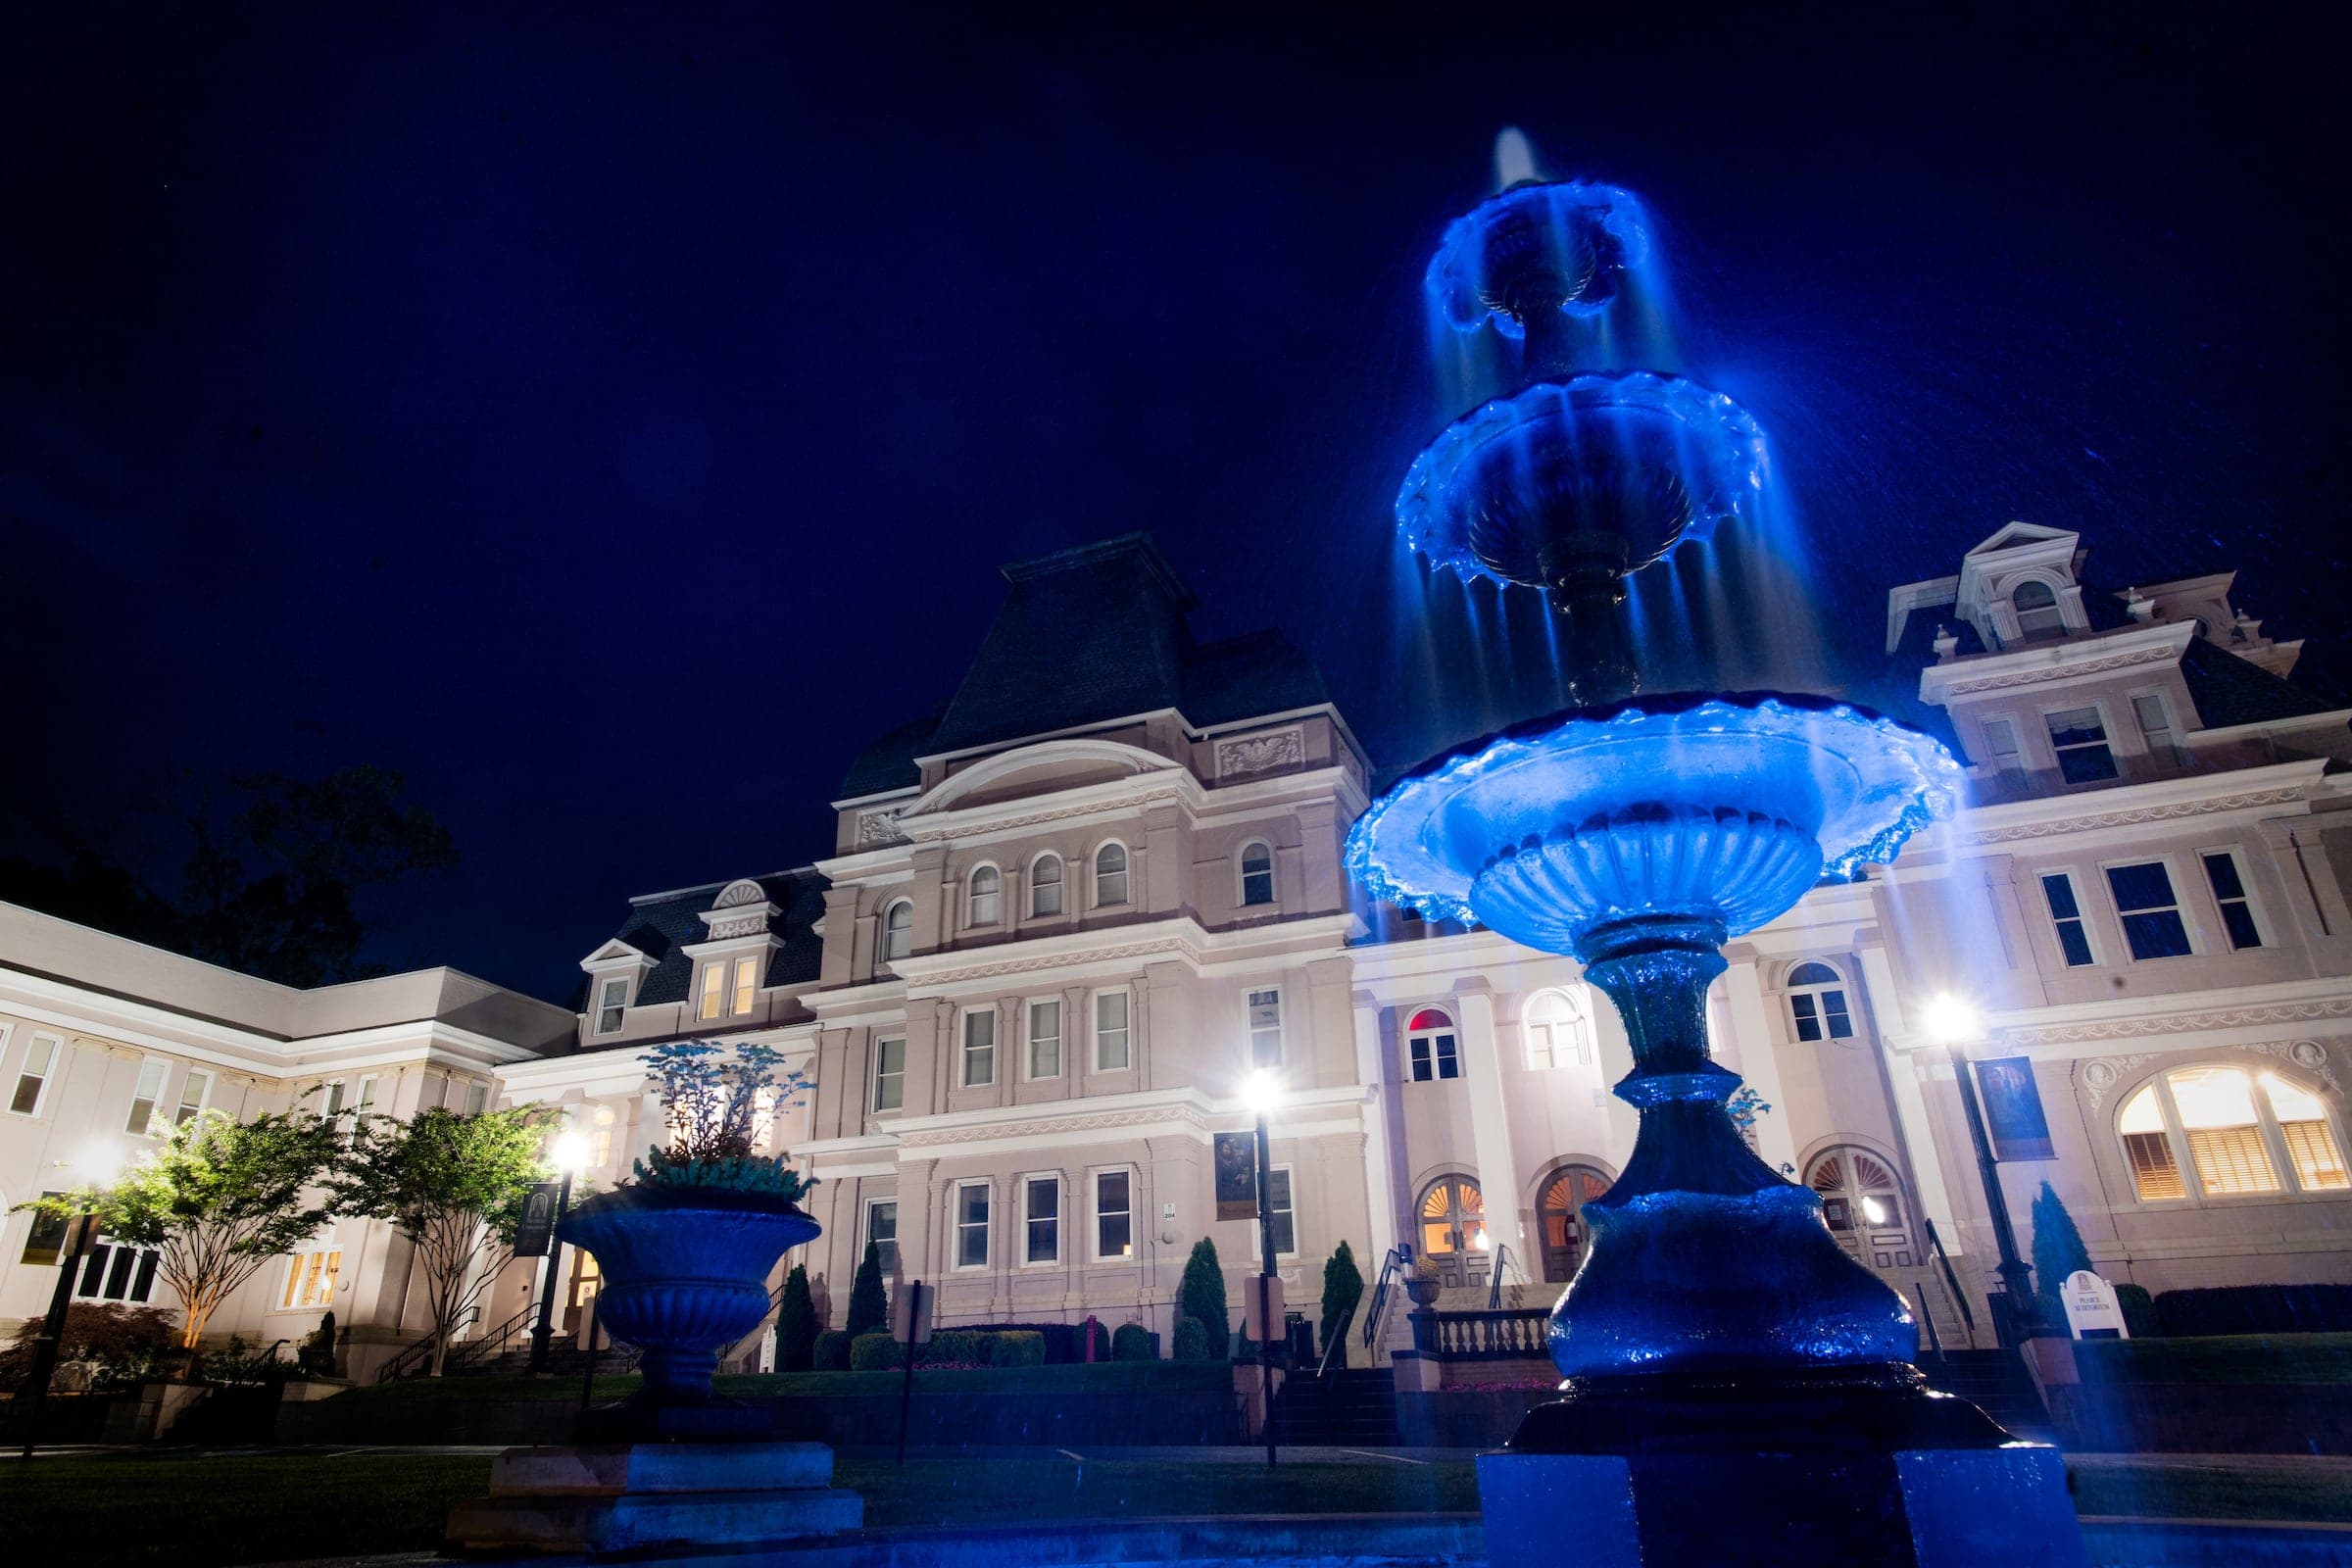 Brenau fountain goes blue for health care workers.